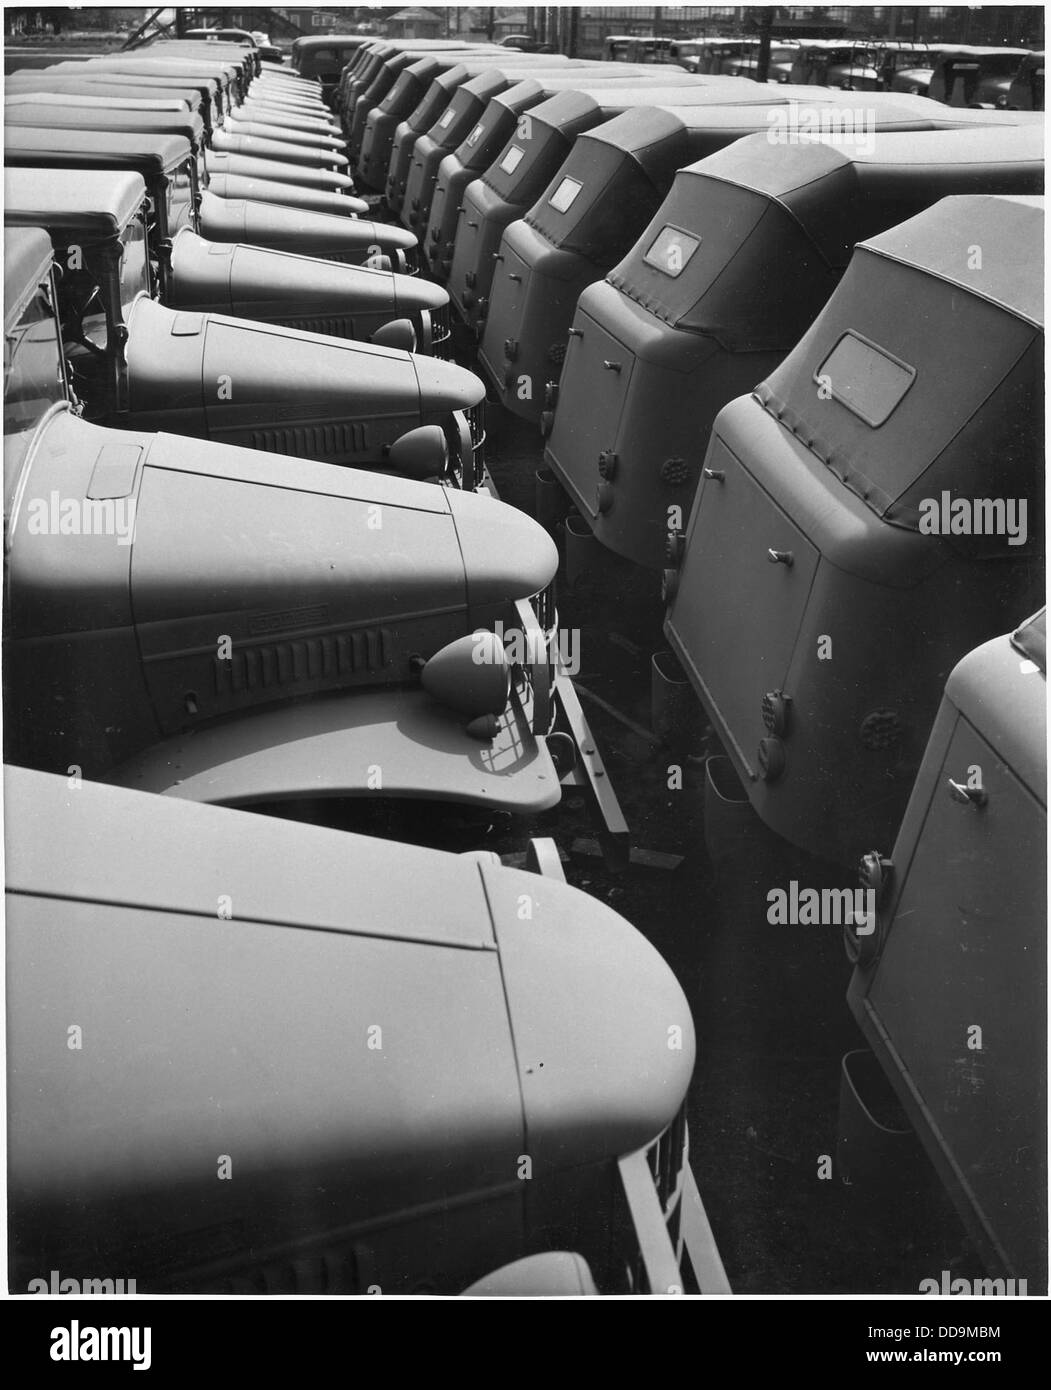 Line-up of United States Army trucks, ready for shipment to Army posts throughout the country. - - 196218 Stock Photo